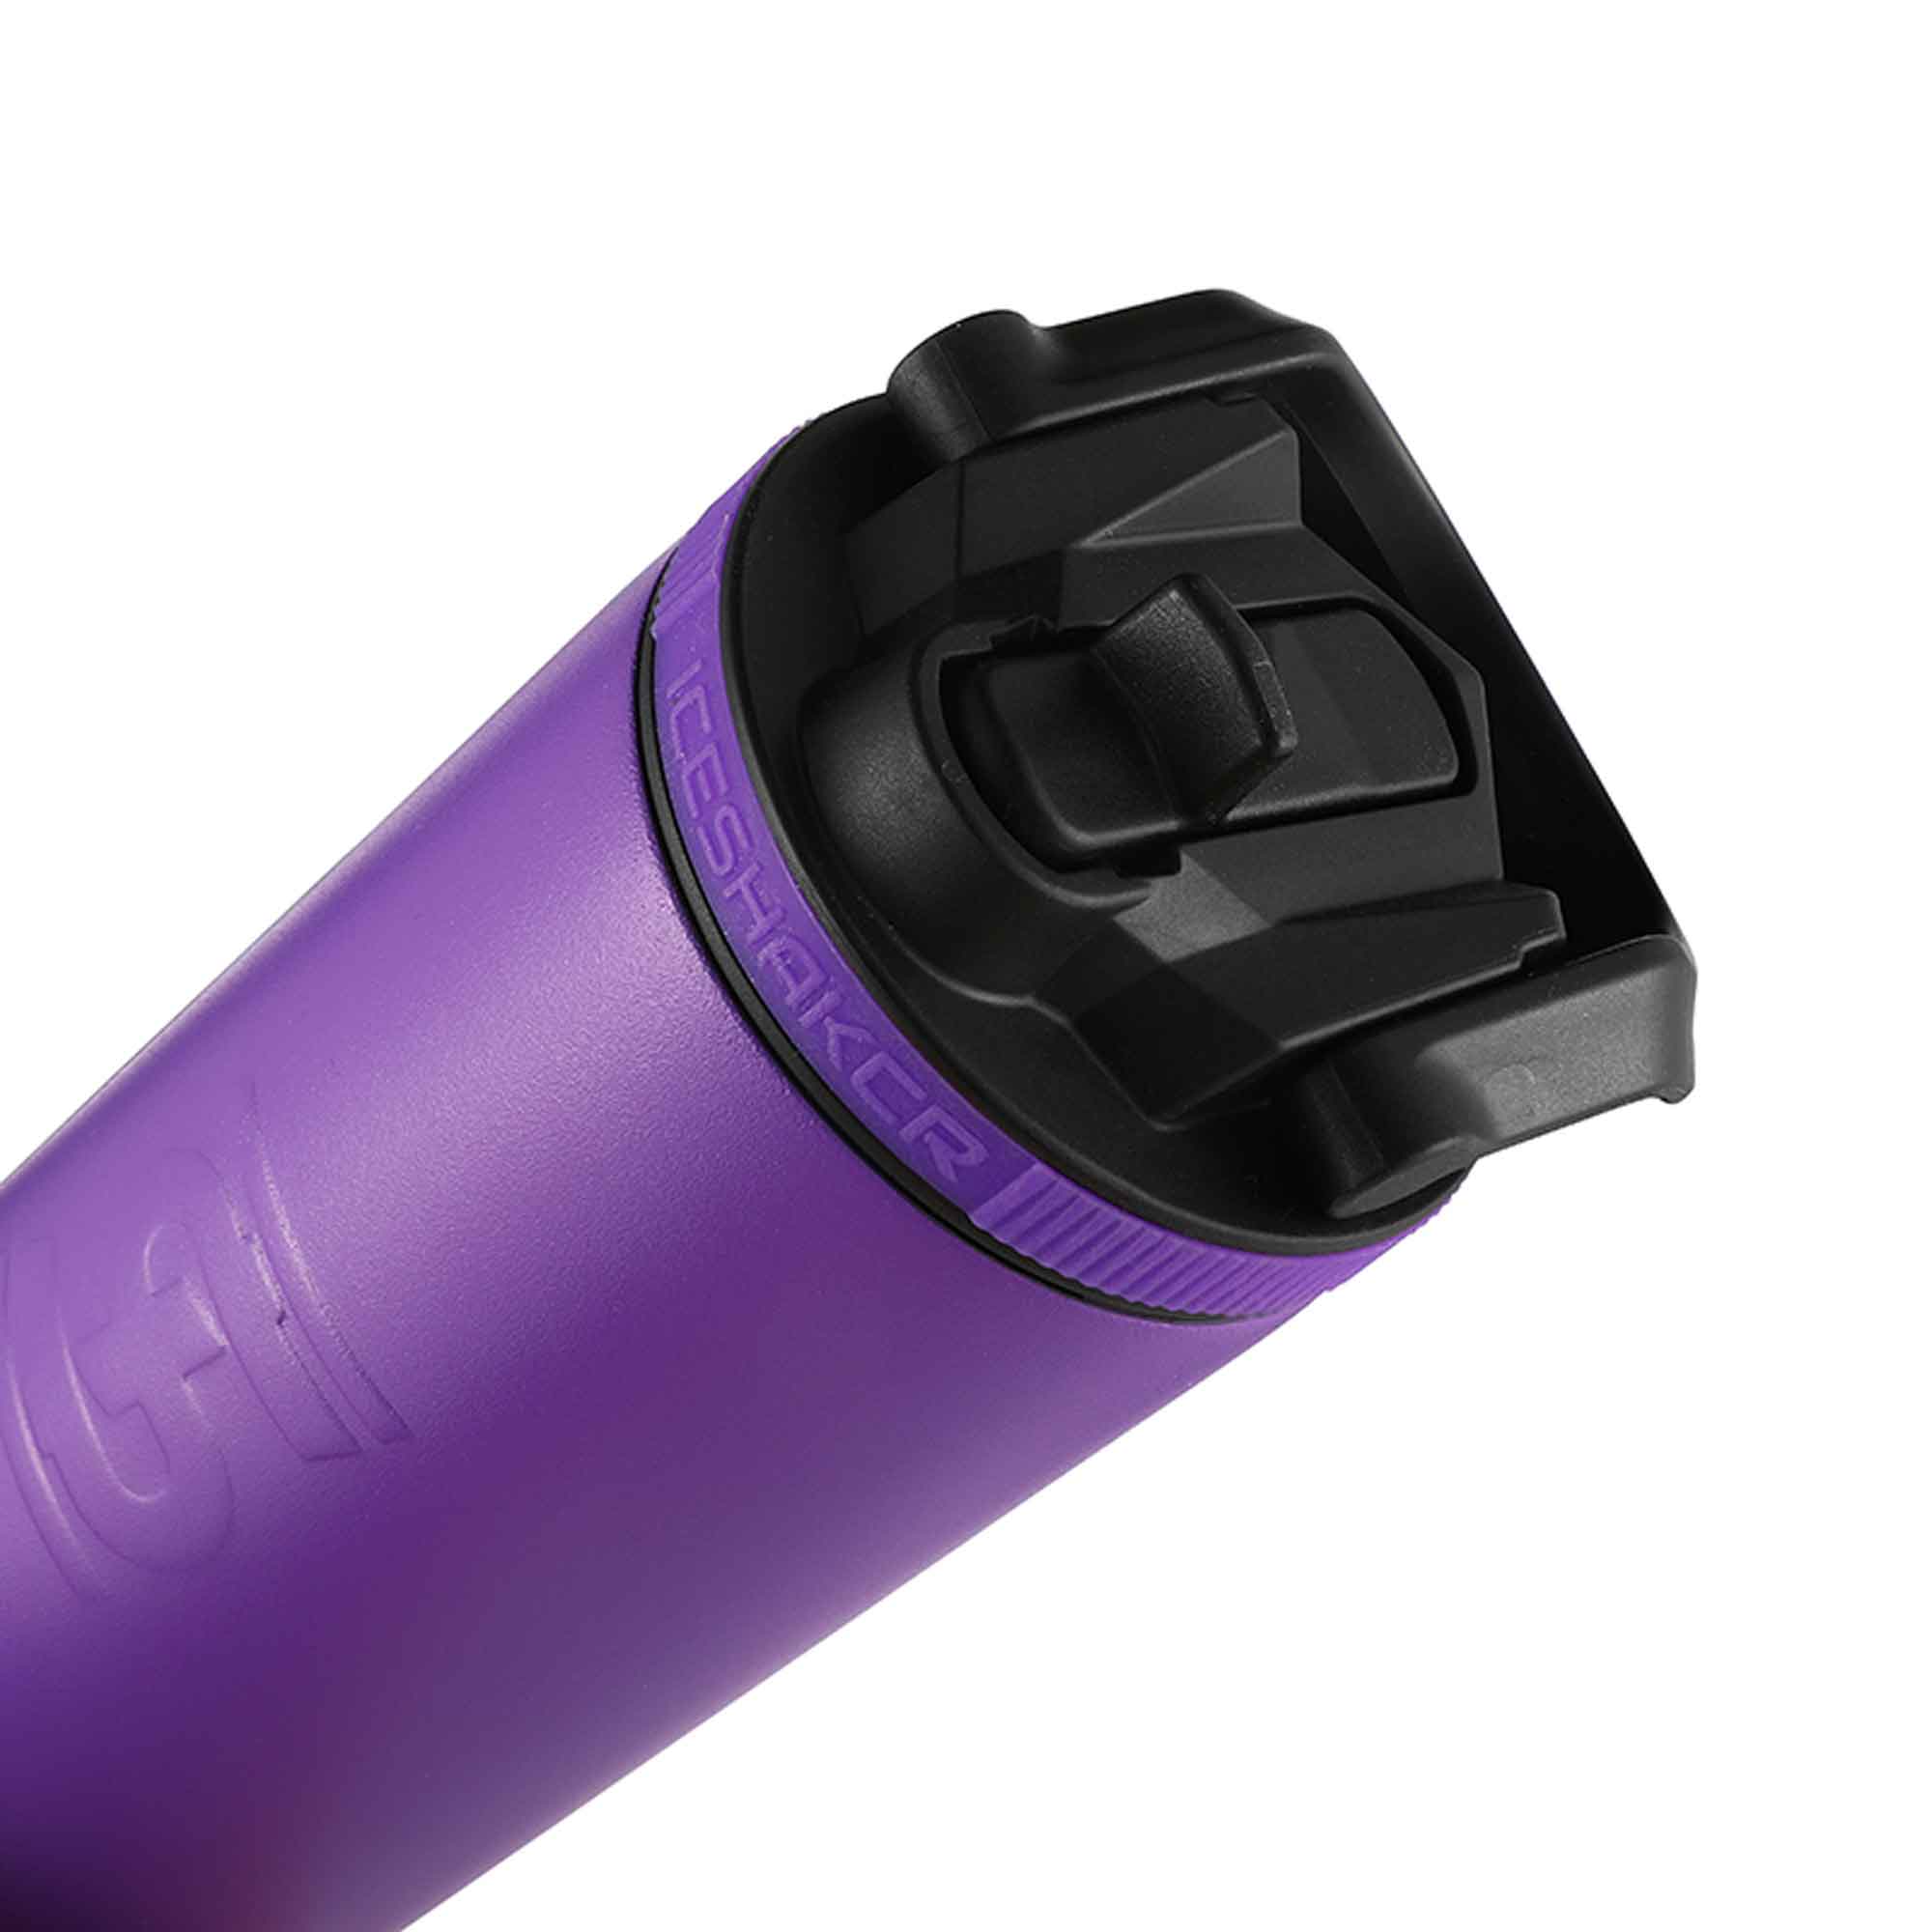 Performa FitGo Insulated Shaker Cup Holder Sleeve - Black/Purple